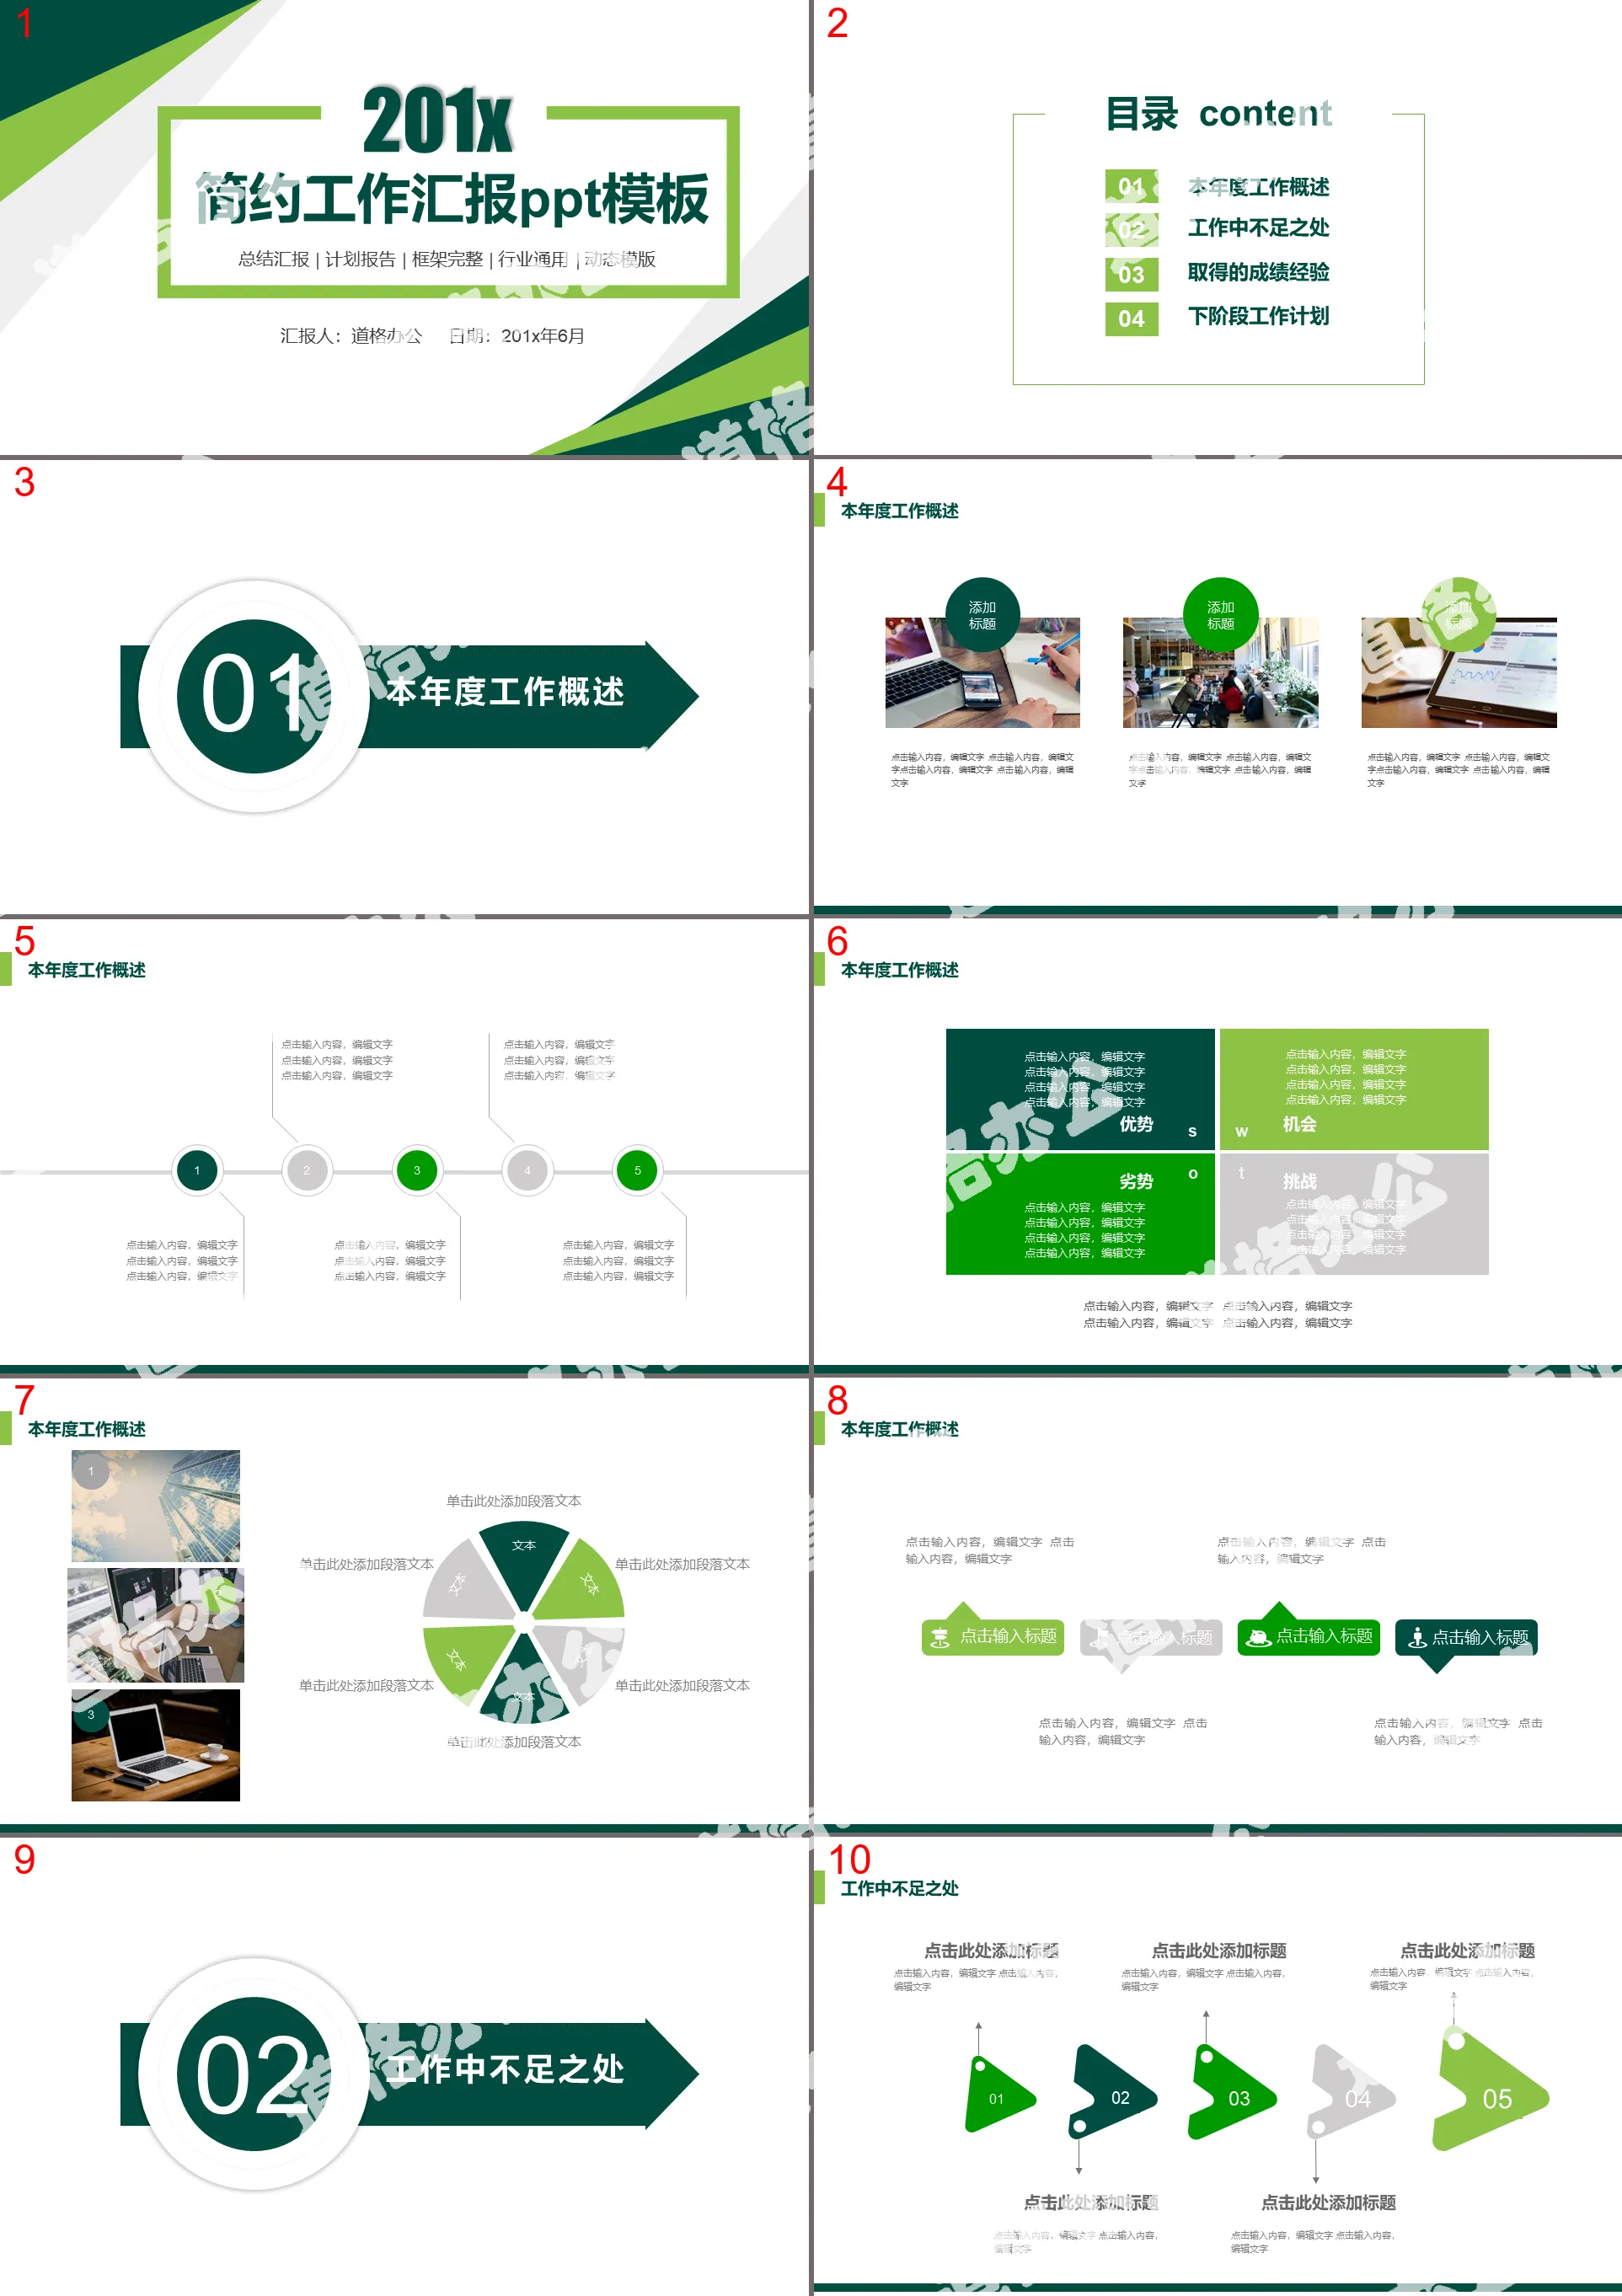 General work report PPT template with green simple polygonal background